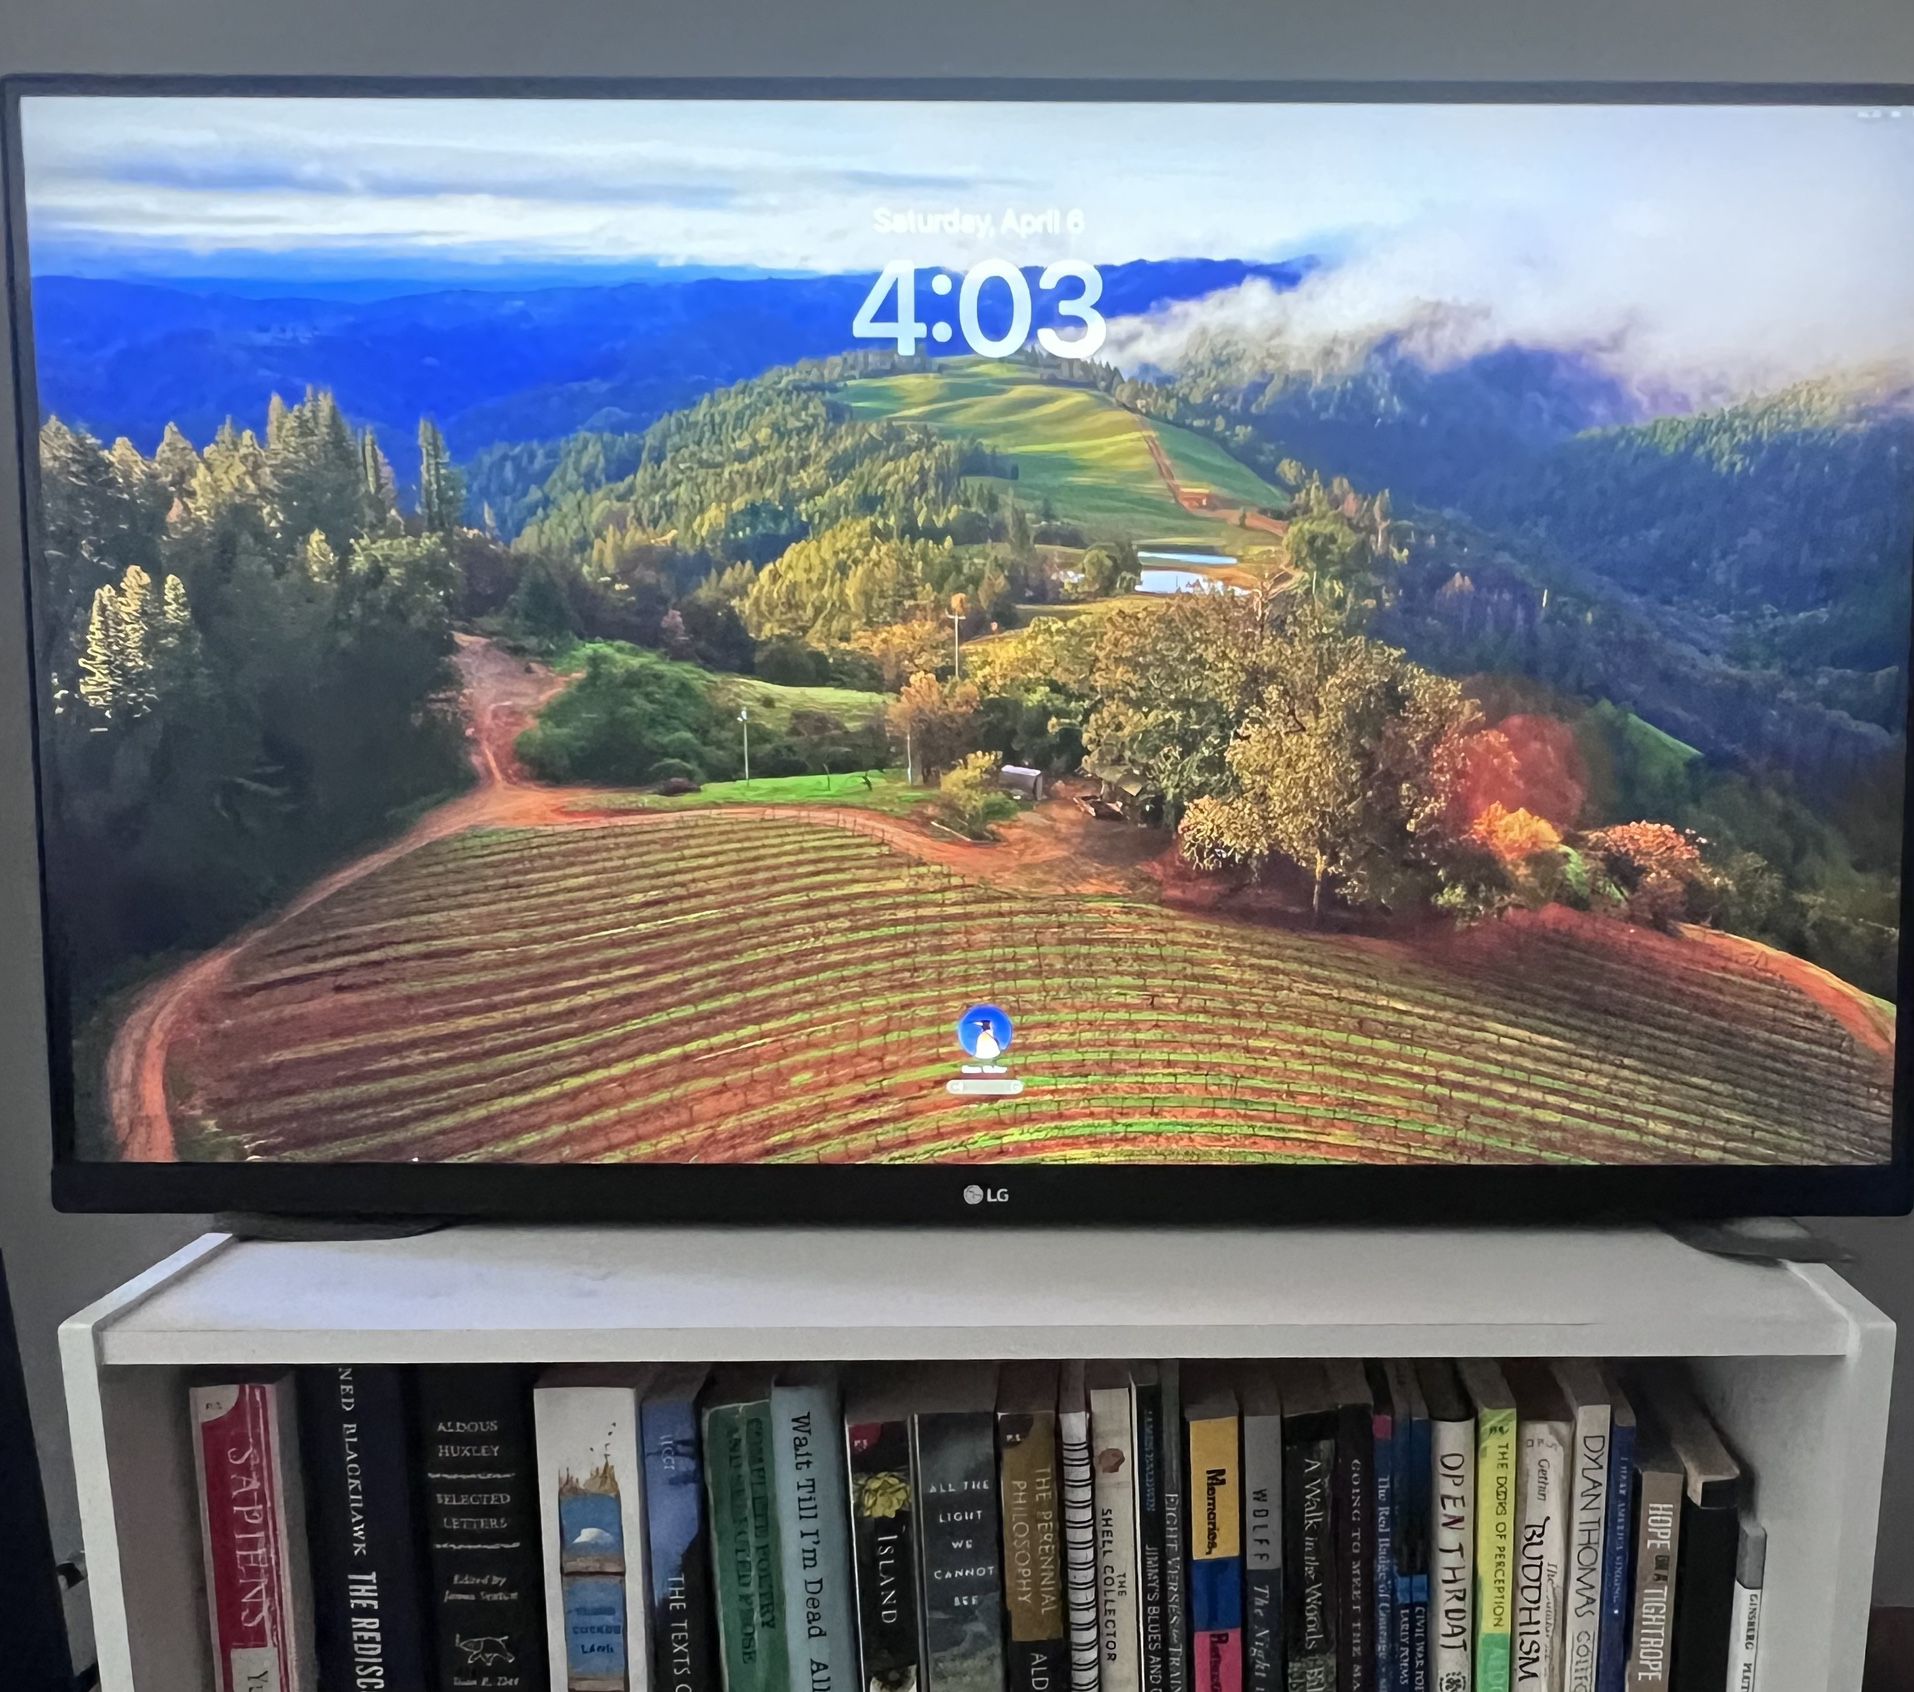 LG 32UN880-B 32" UltraFine Display Ergo UHD 4K IPS Display with HDR 10 Compatibility and USB Type-C Connectivity